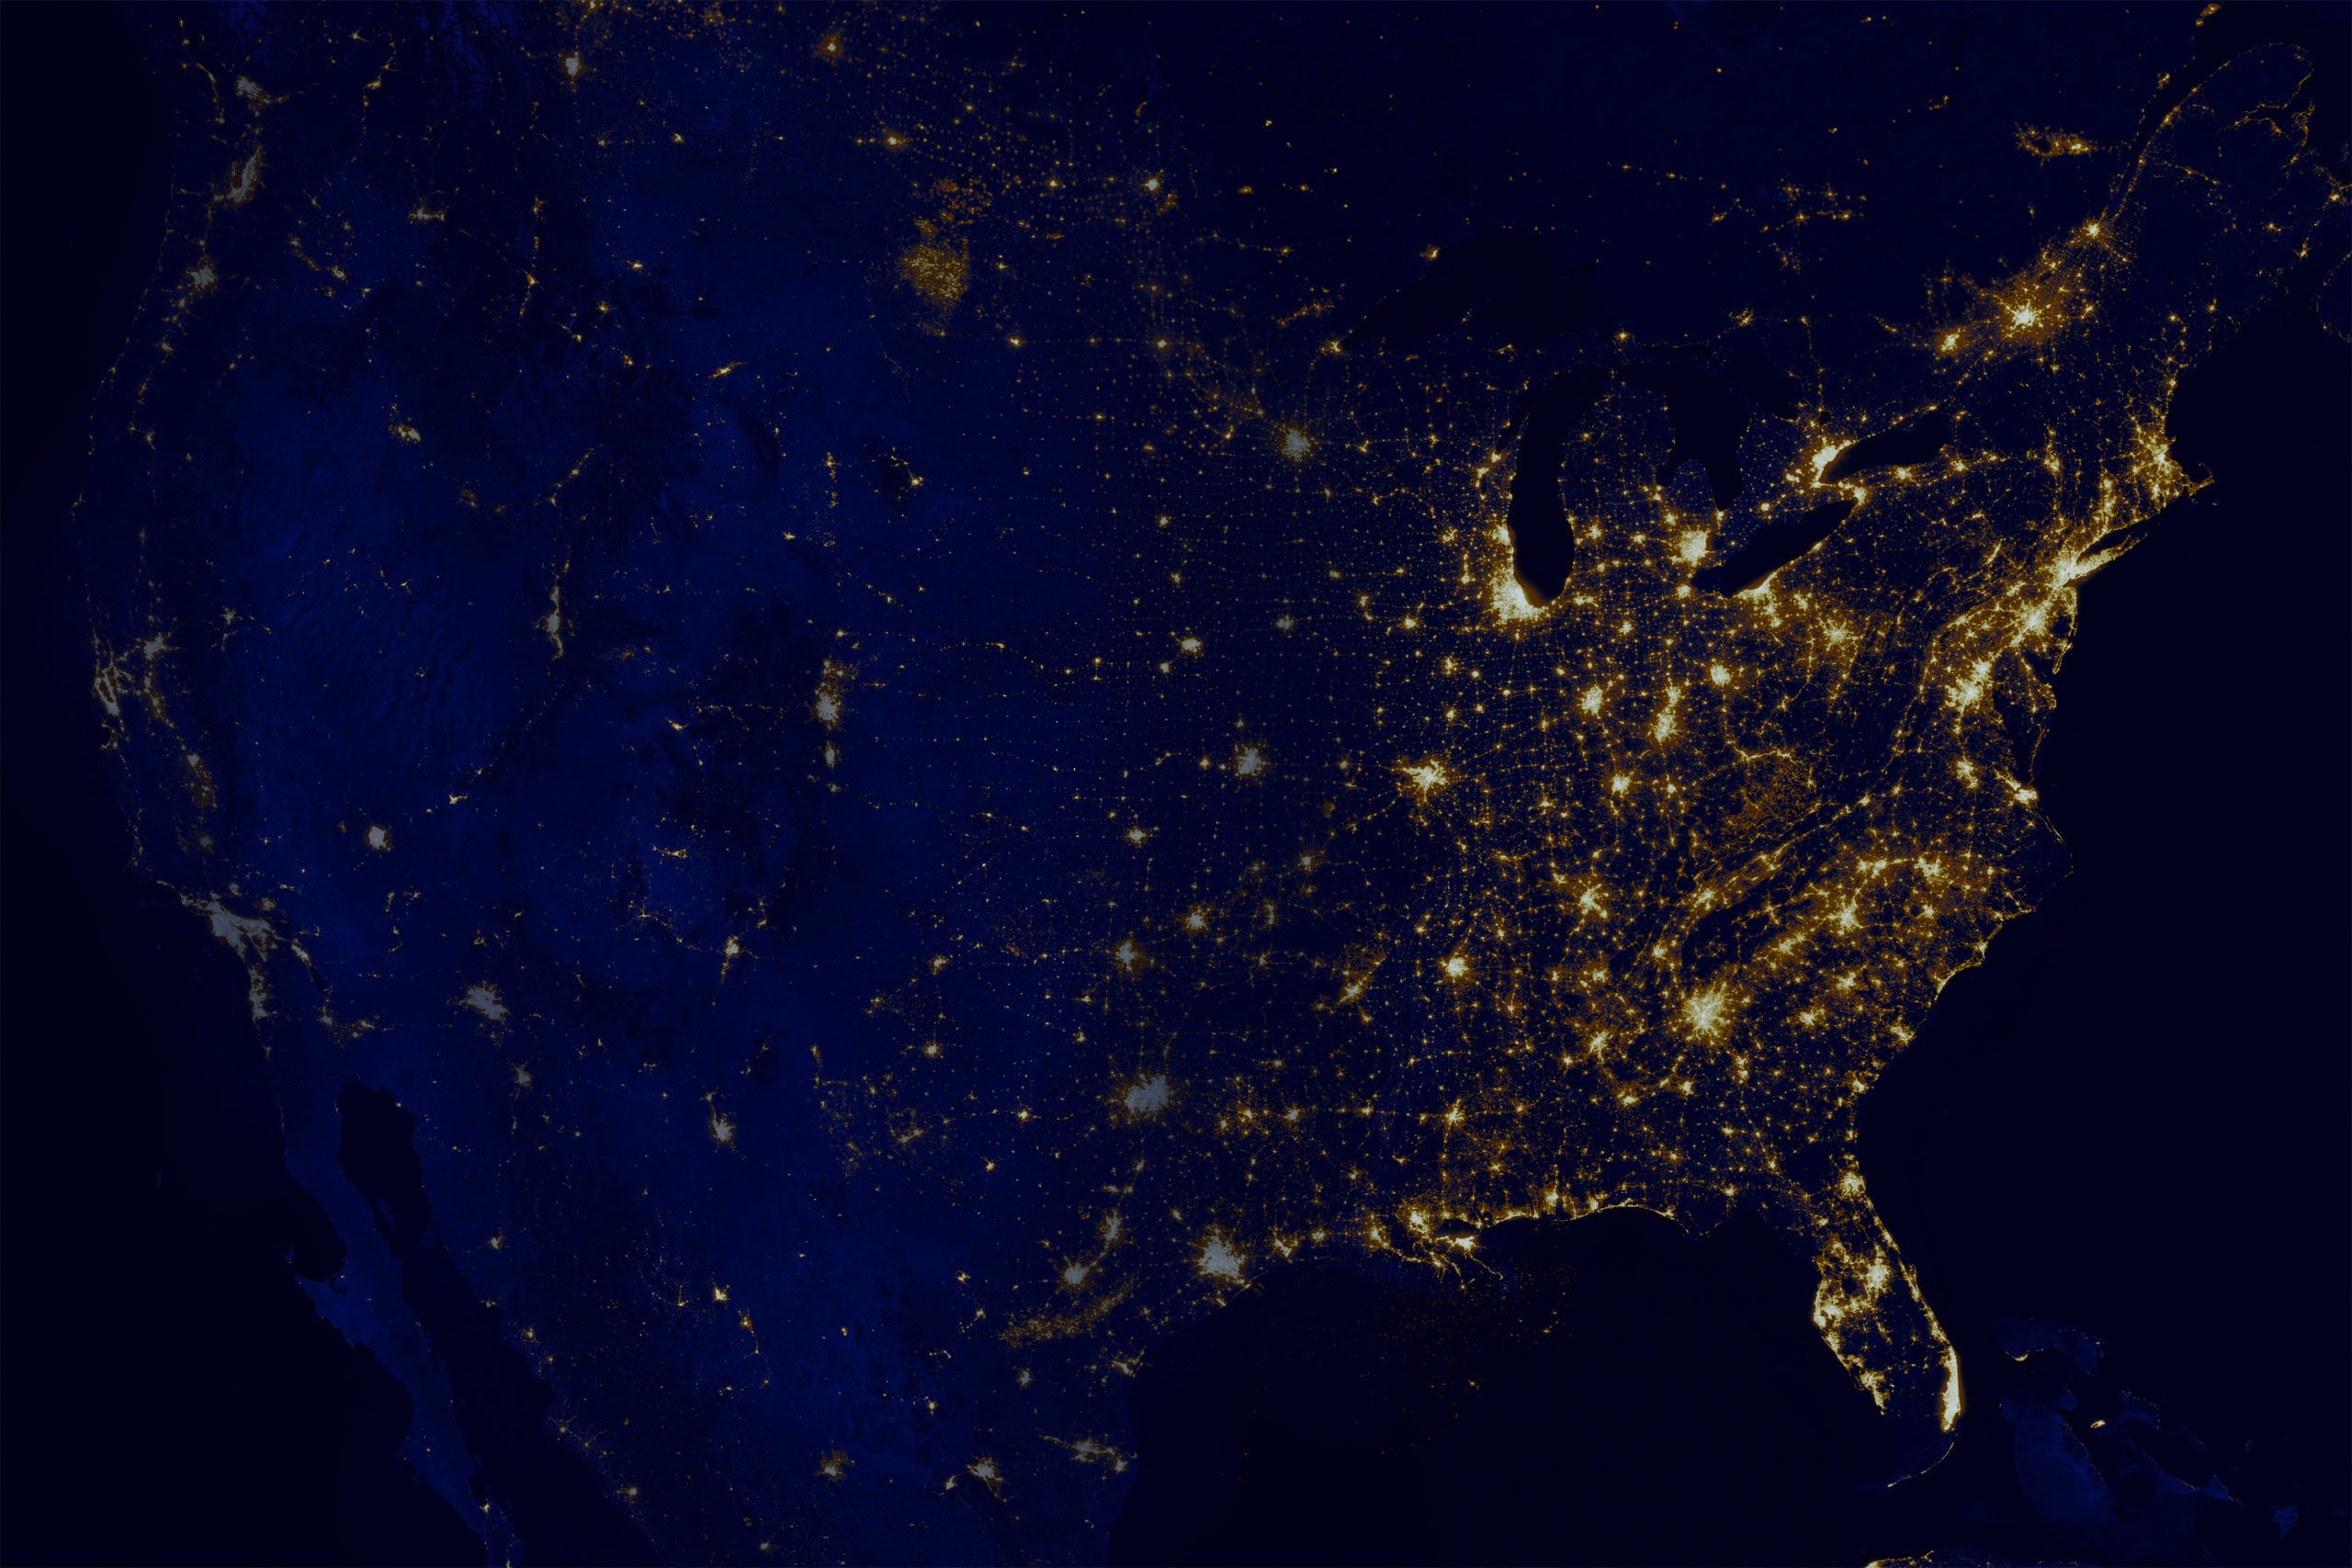 Satellite Image of the US at night. Larger cities have brighter light emissions, and the east coast is more illuminated than the west coast.